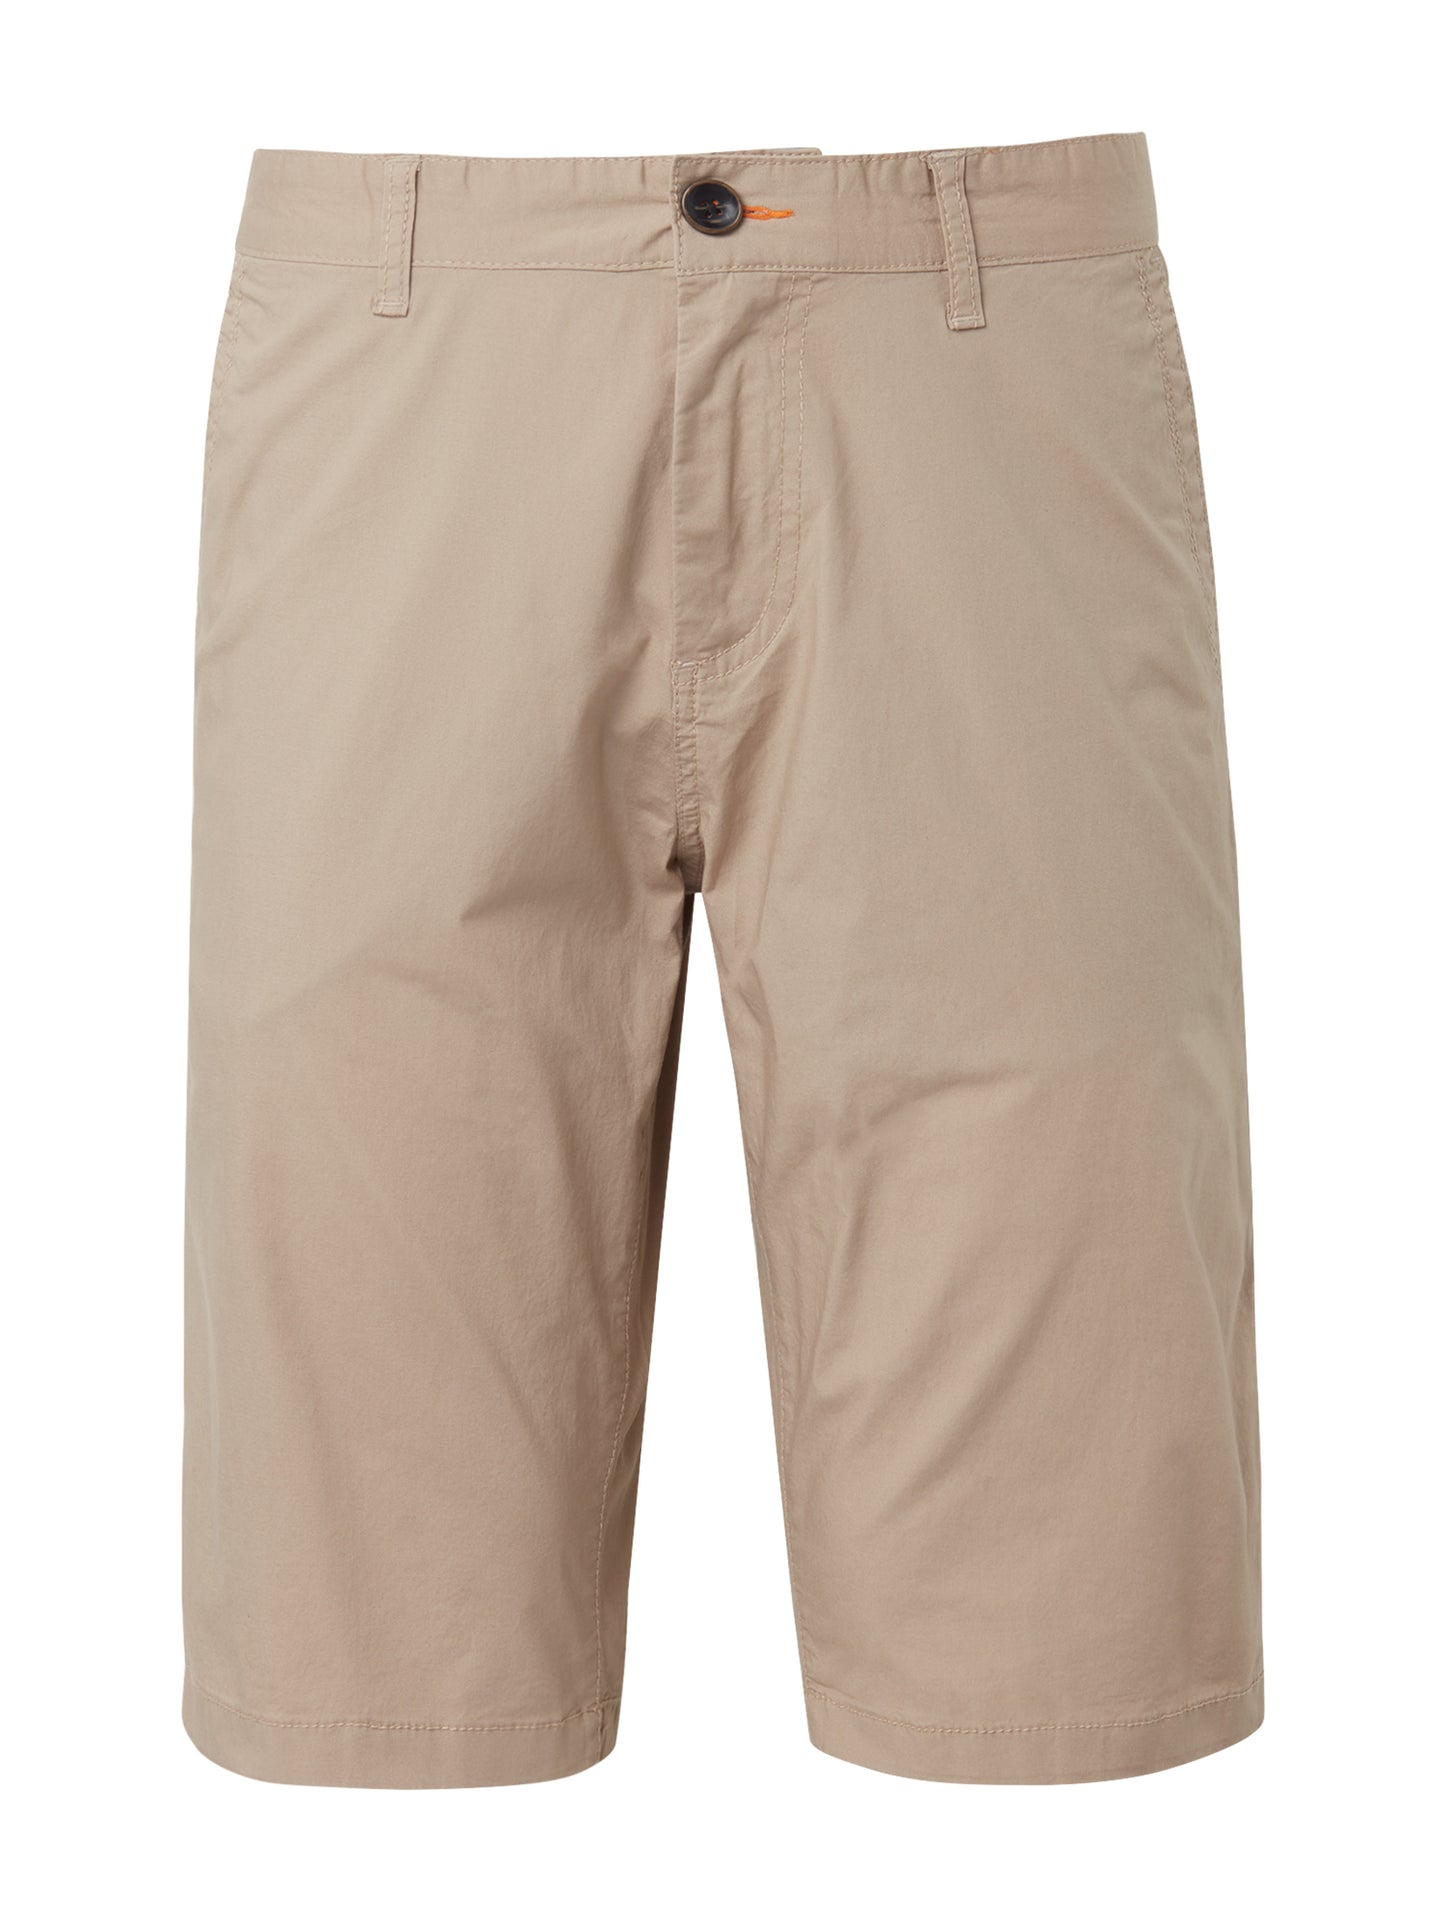 chino short w patched pockets - 1008529